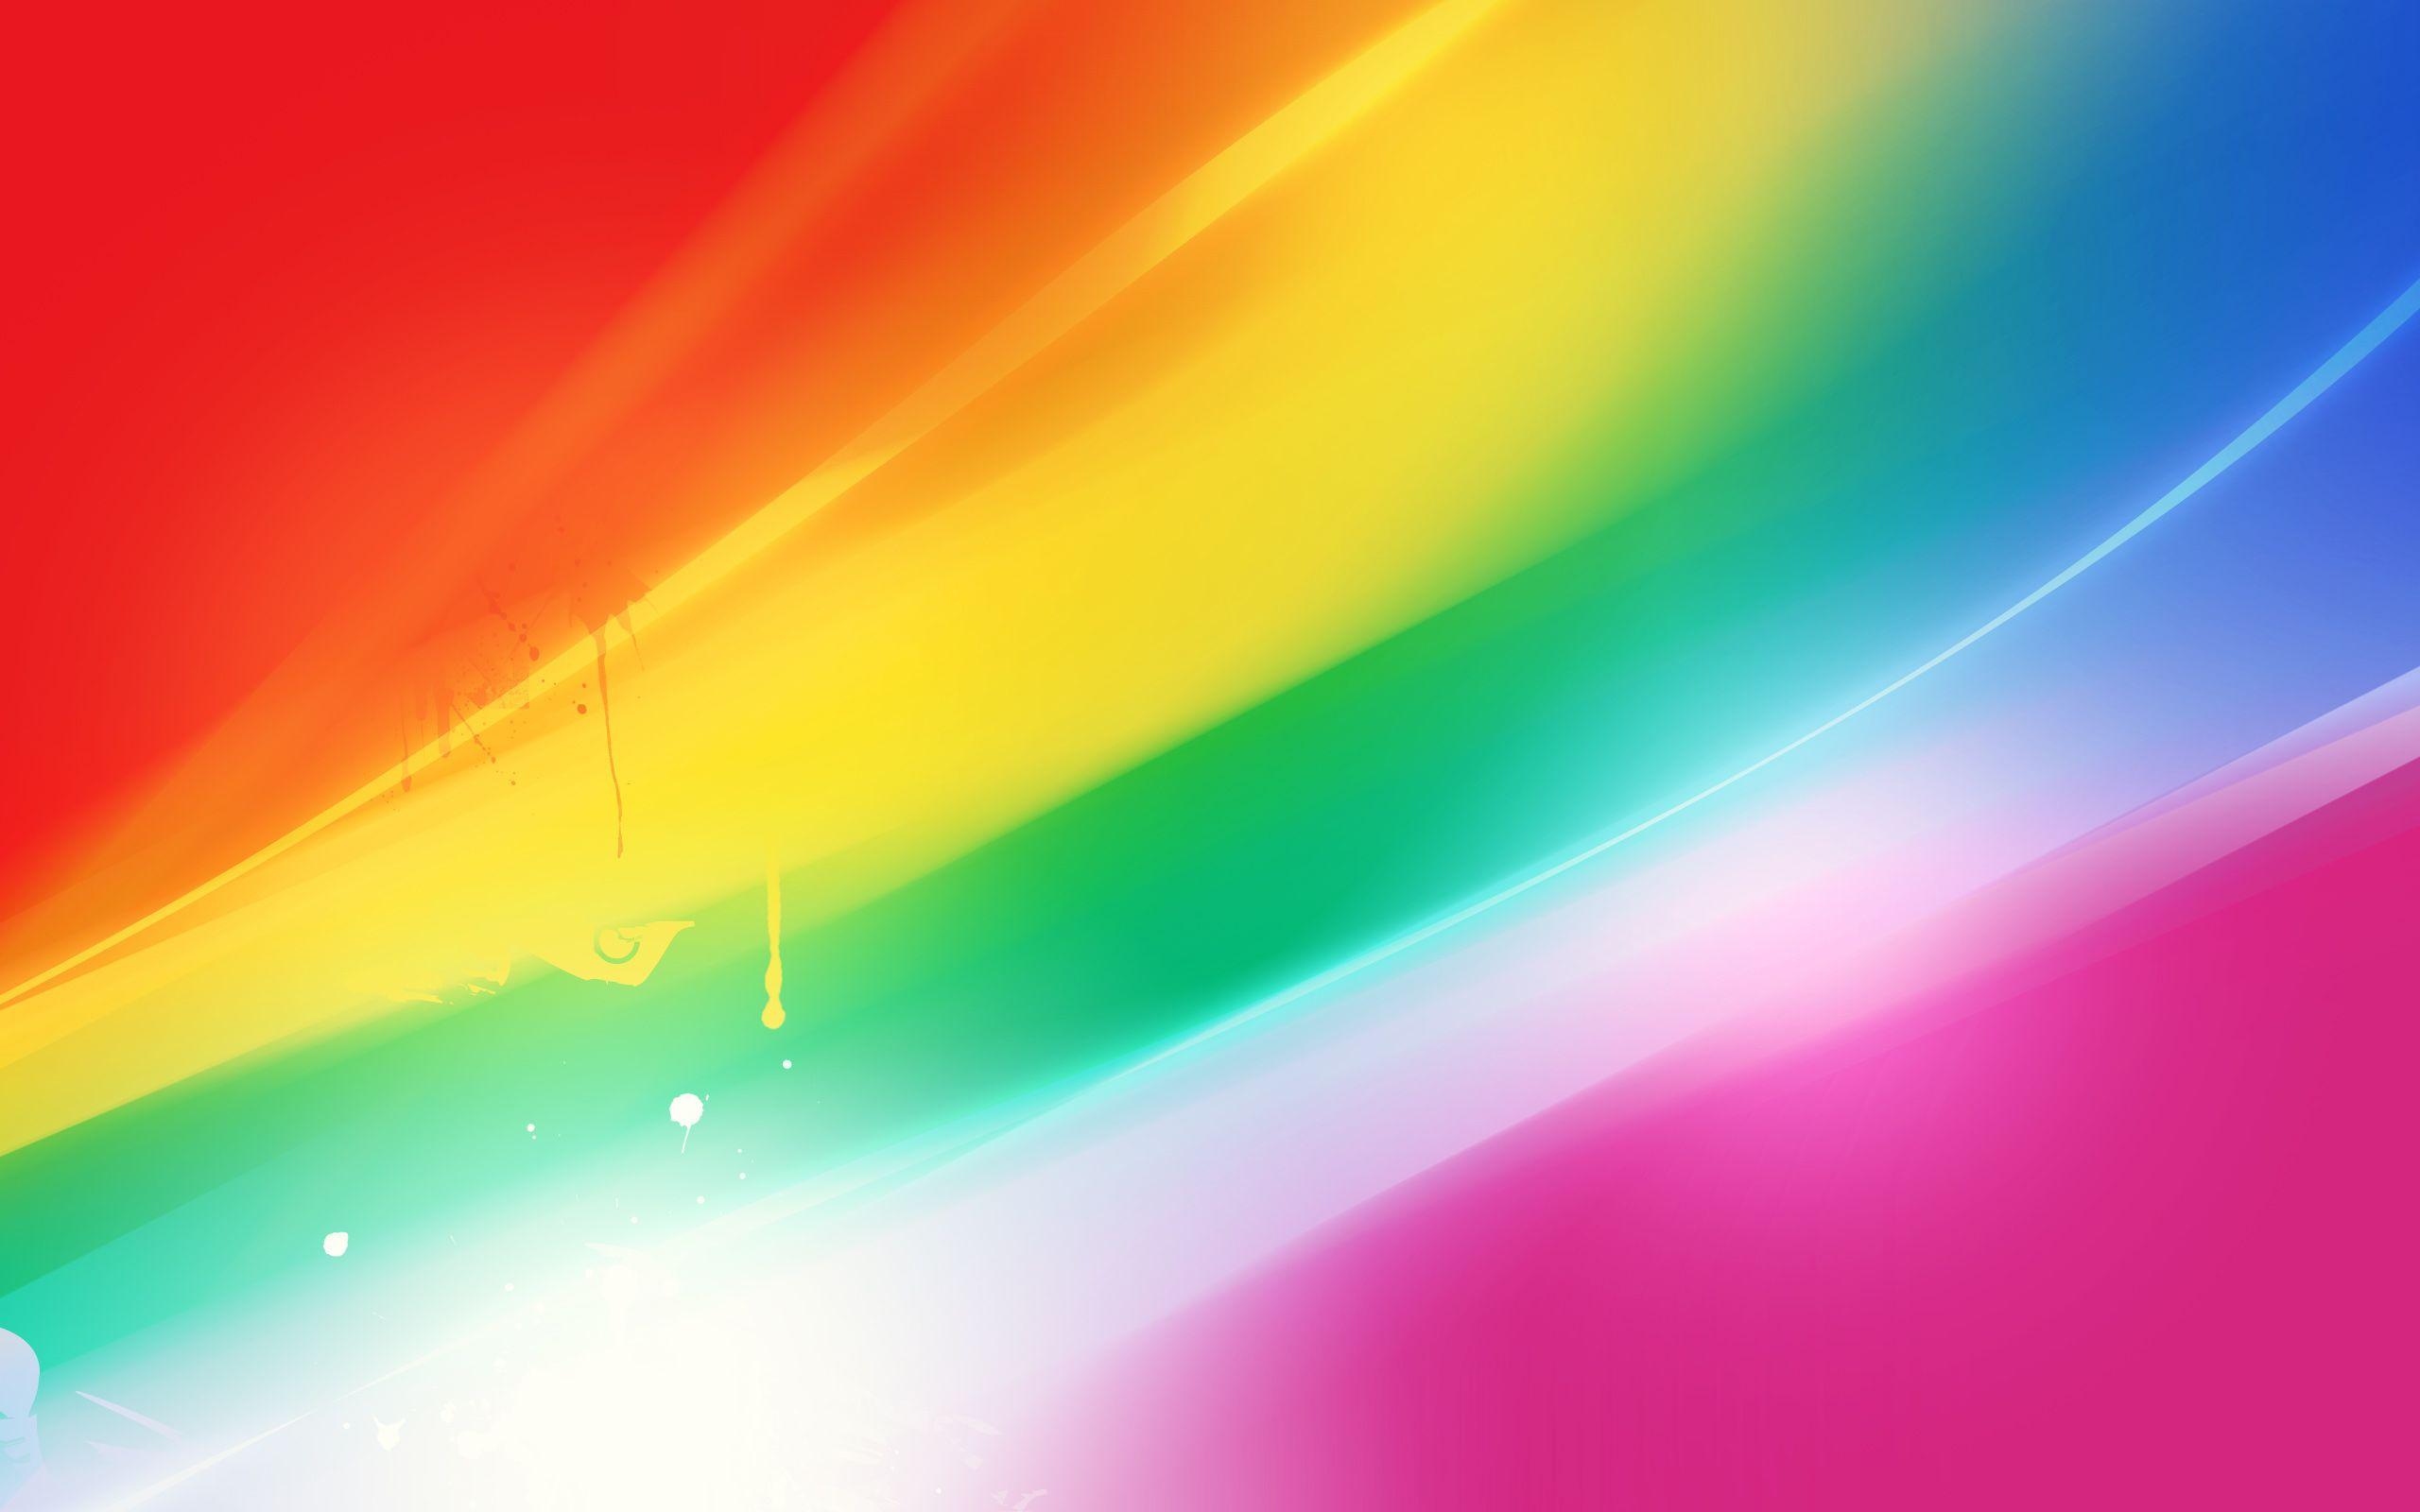 Colorful Background Photos Download Free Colorful Background Stock Photos   HD Images